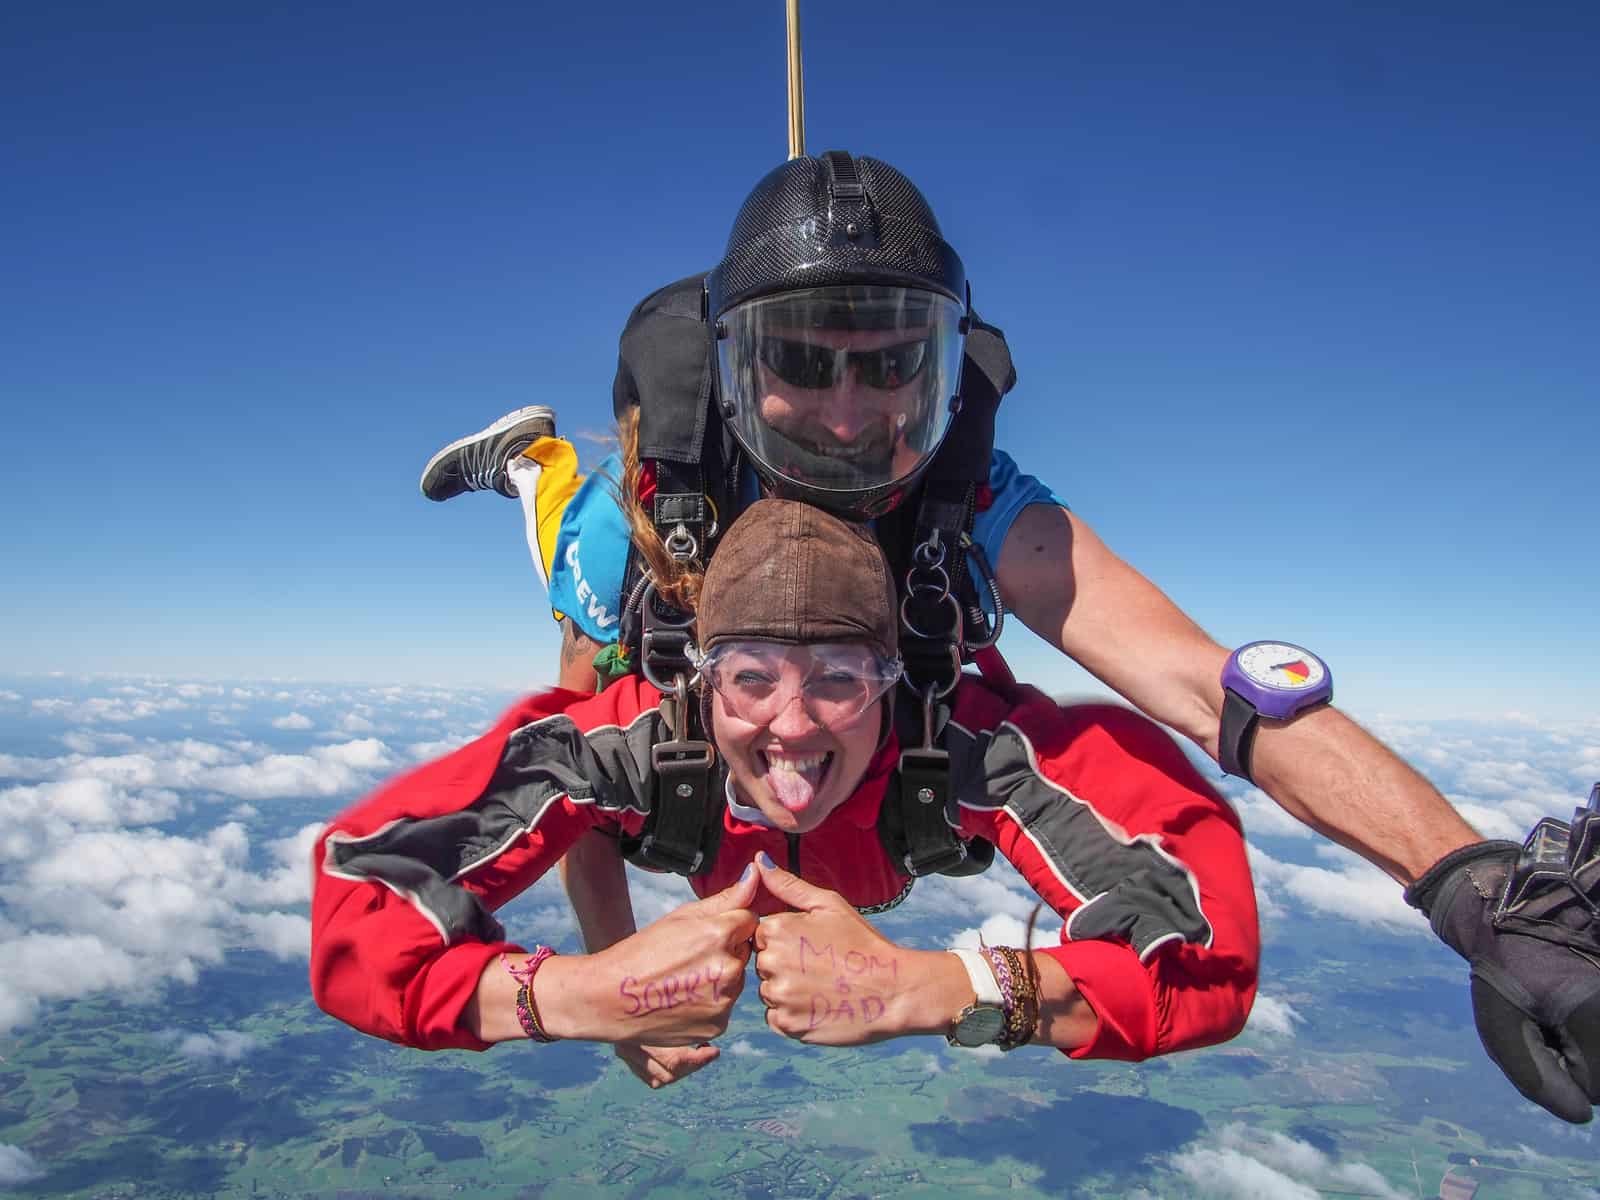 Stray NZ - Skydive Bay of Islands - send a message during your skydive